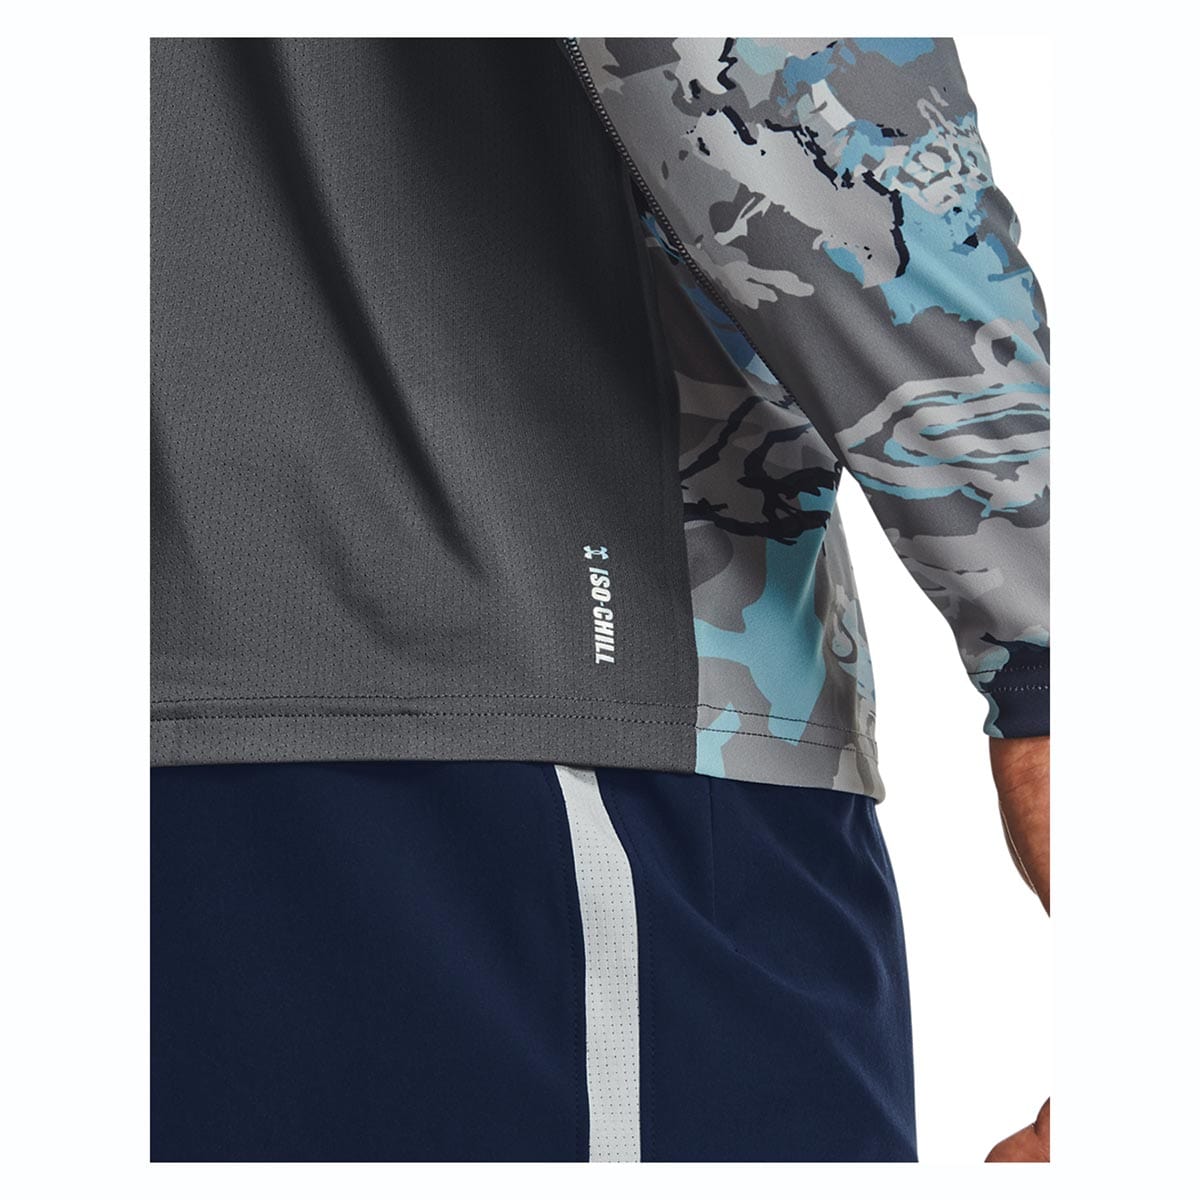 Under Armour Men's Iso-Chill Shore Break Camo Fish Hoodie, Carolina Blue  (475)/White, Large : Buy Online at Best Price in KSA - Souq is now  : Fashion